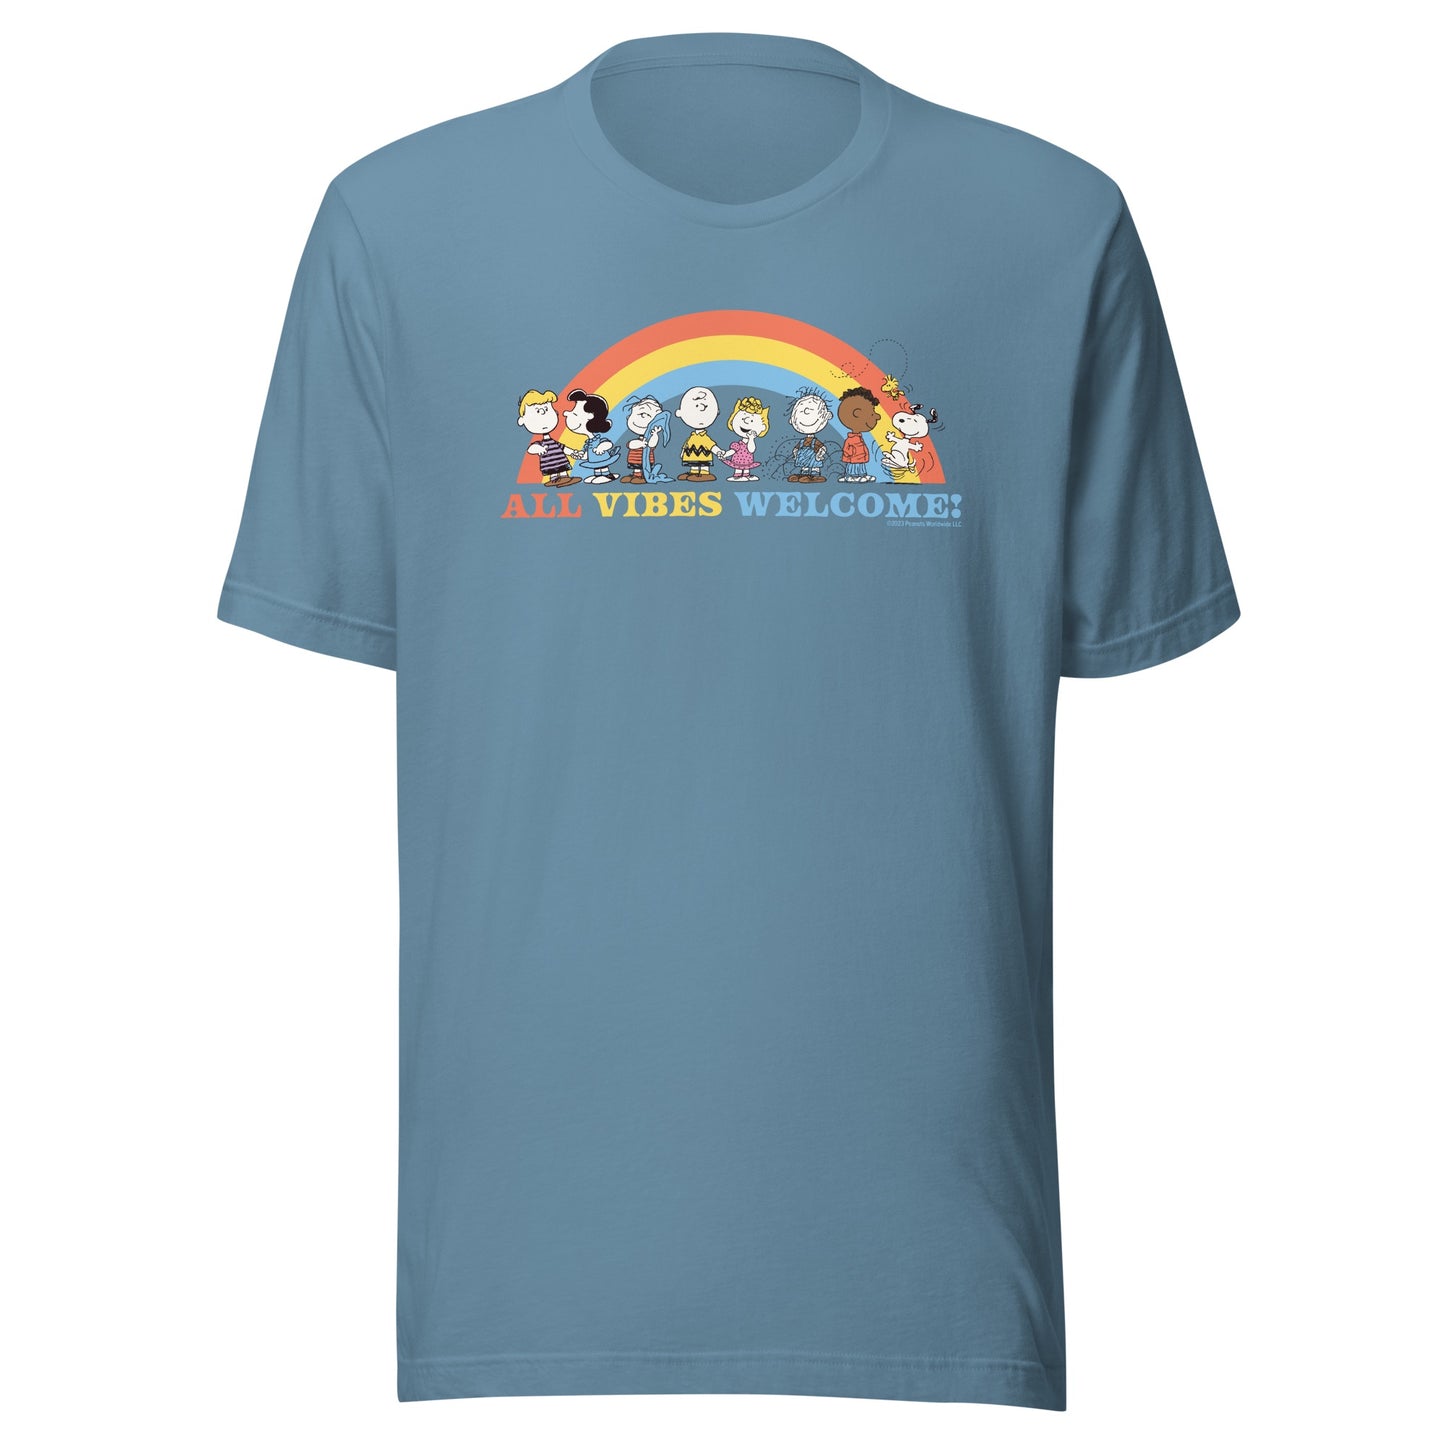 All Vibes Welcome Adult T-Shirt